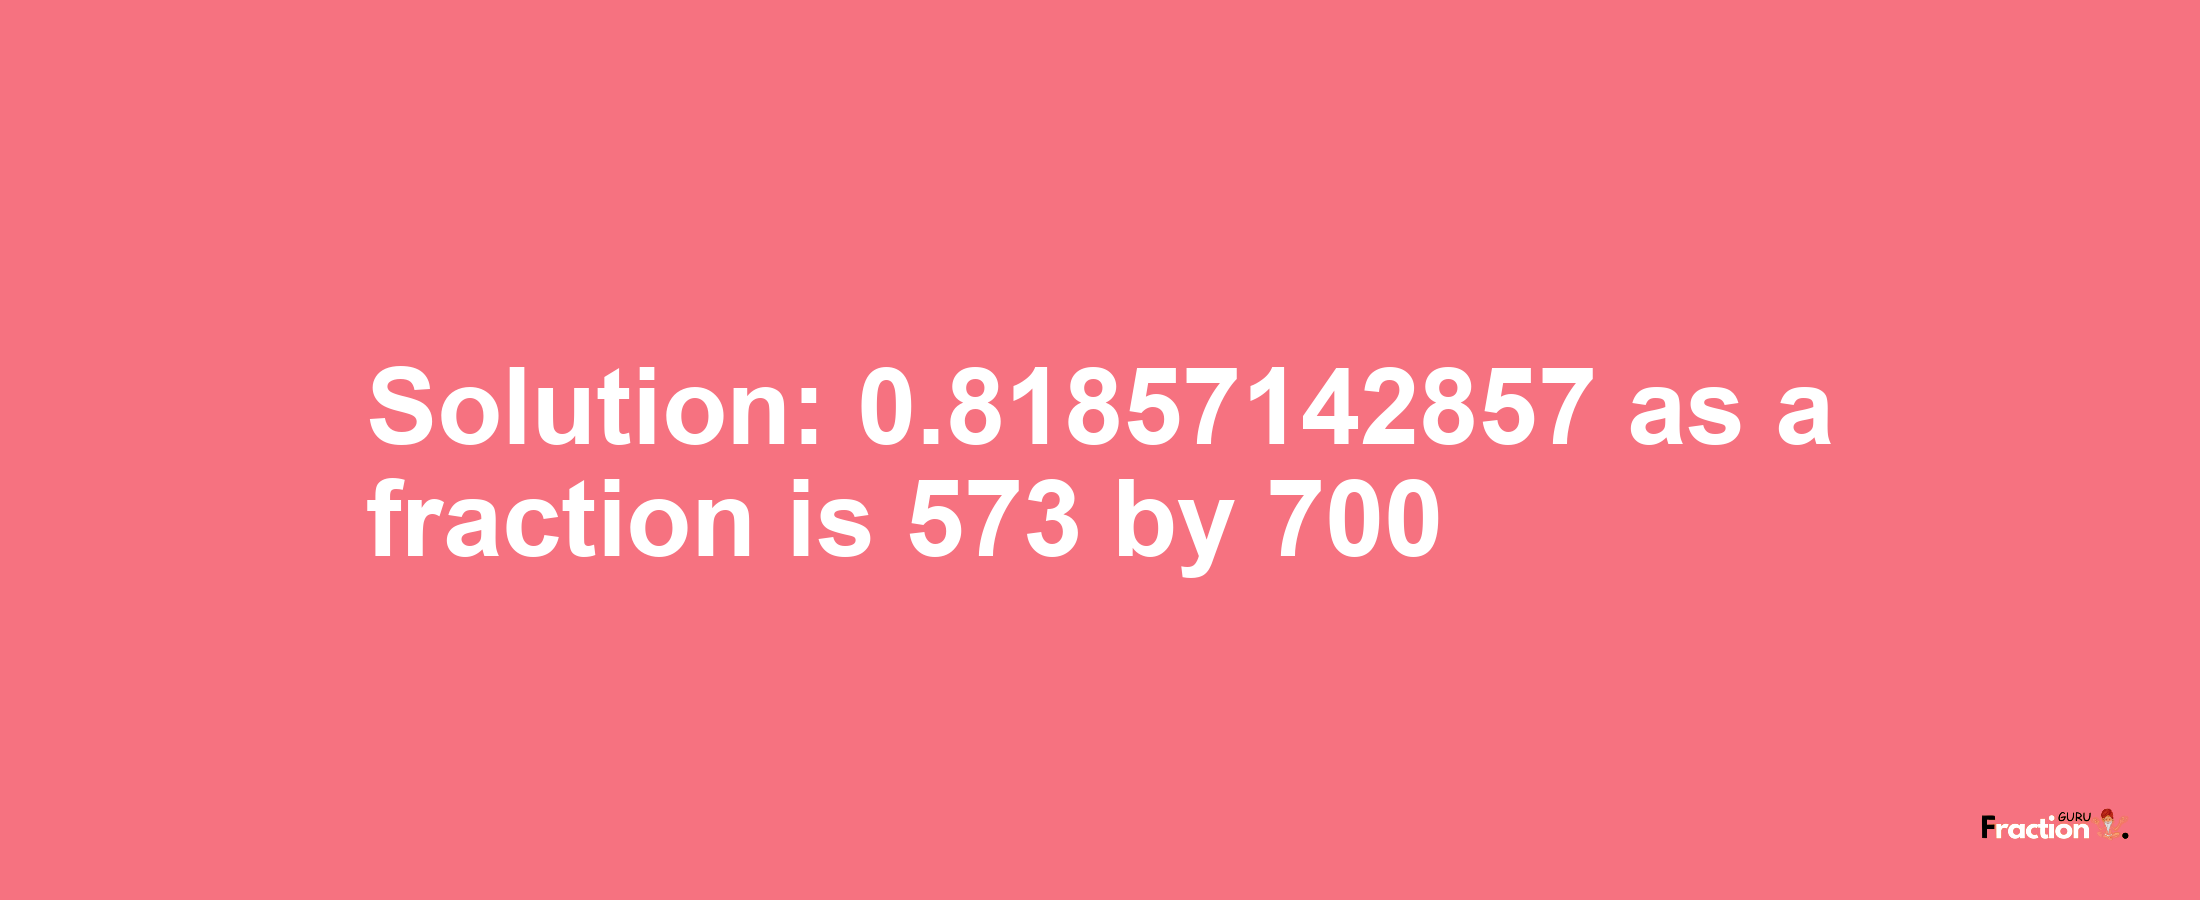 Solution:0.81857142857 as a fraction is 573/700